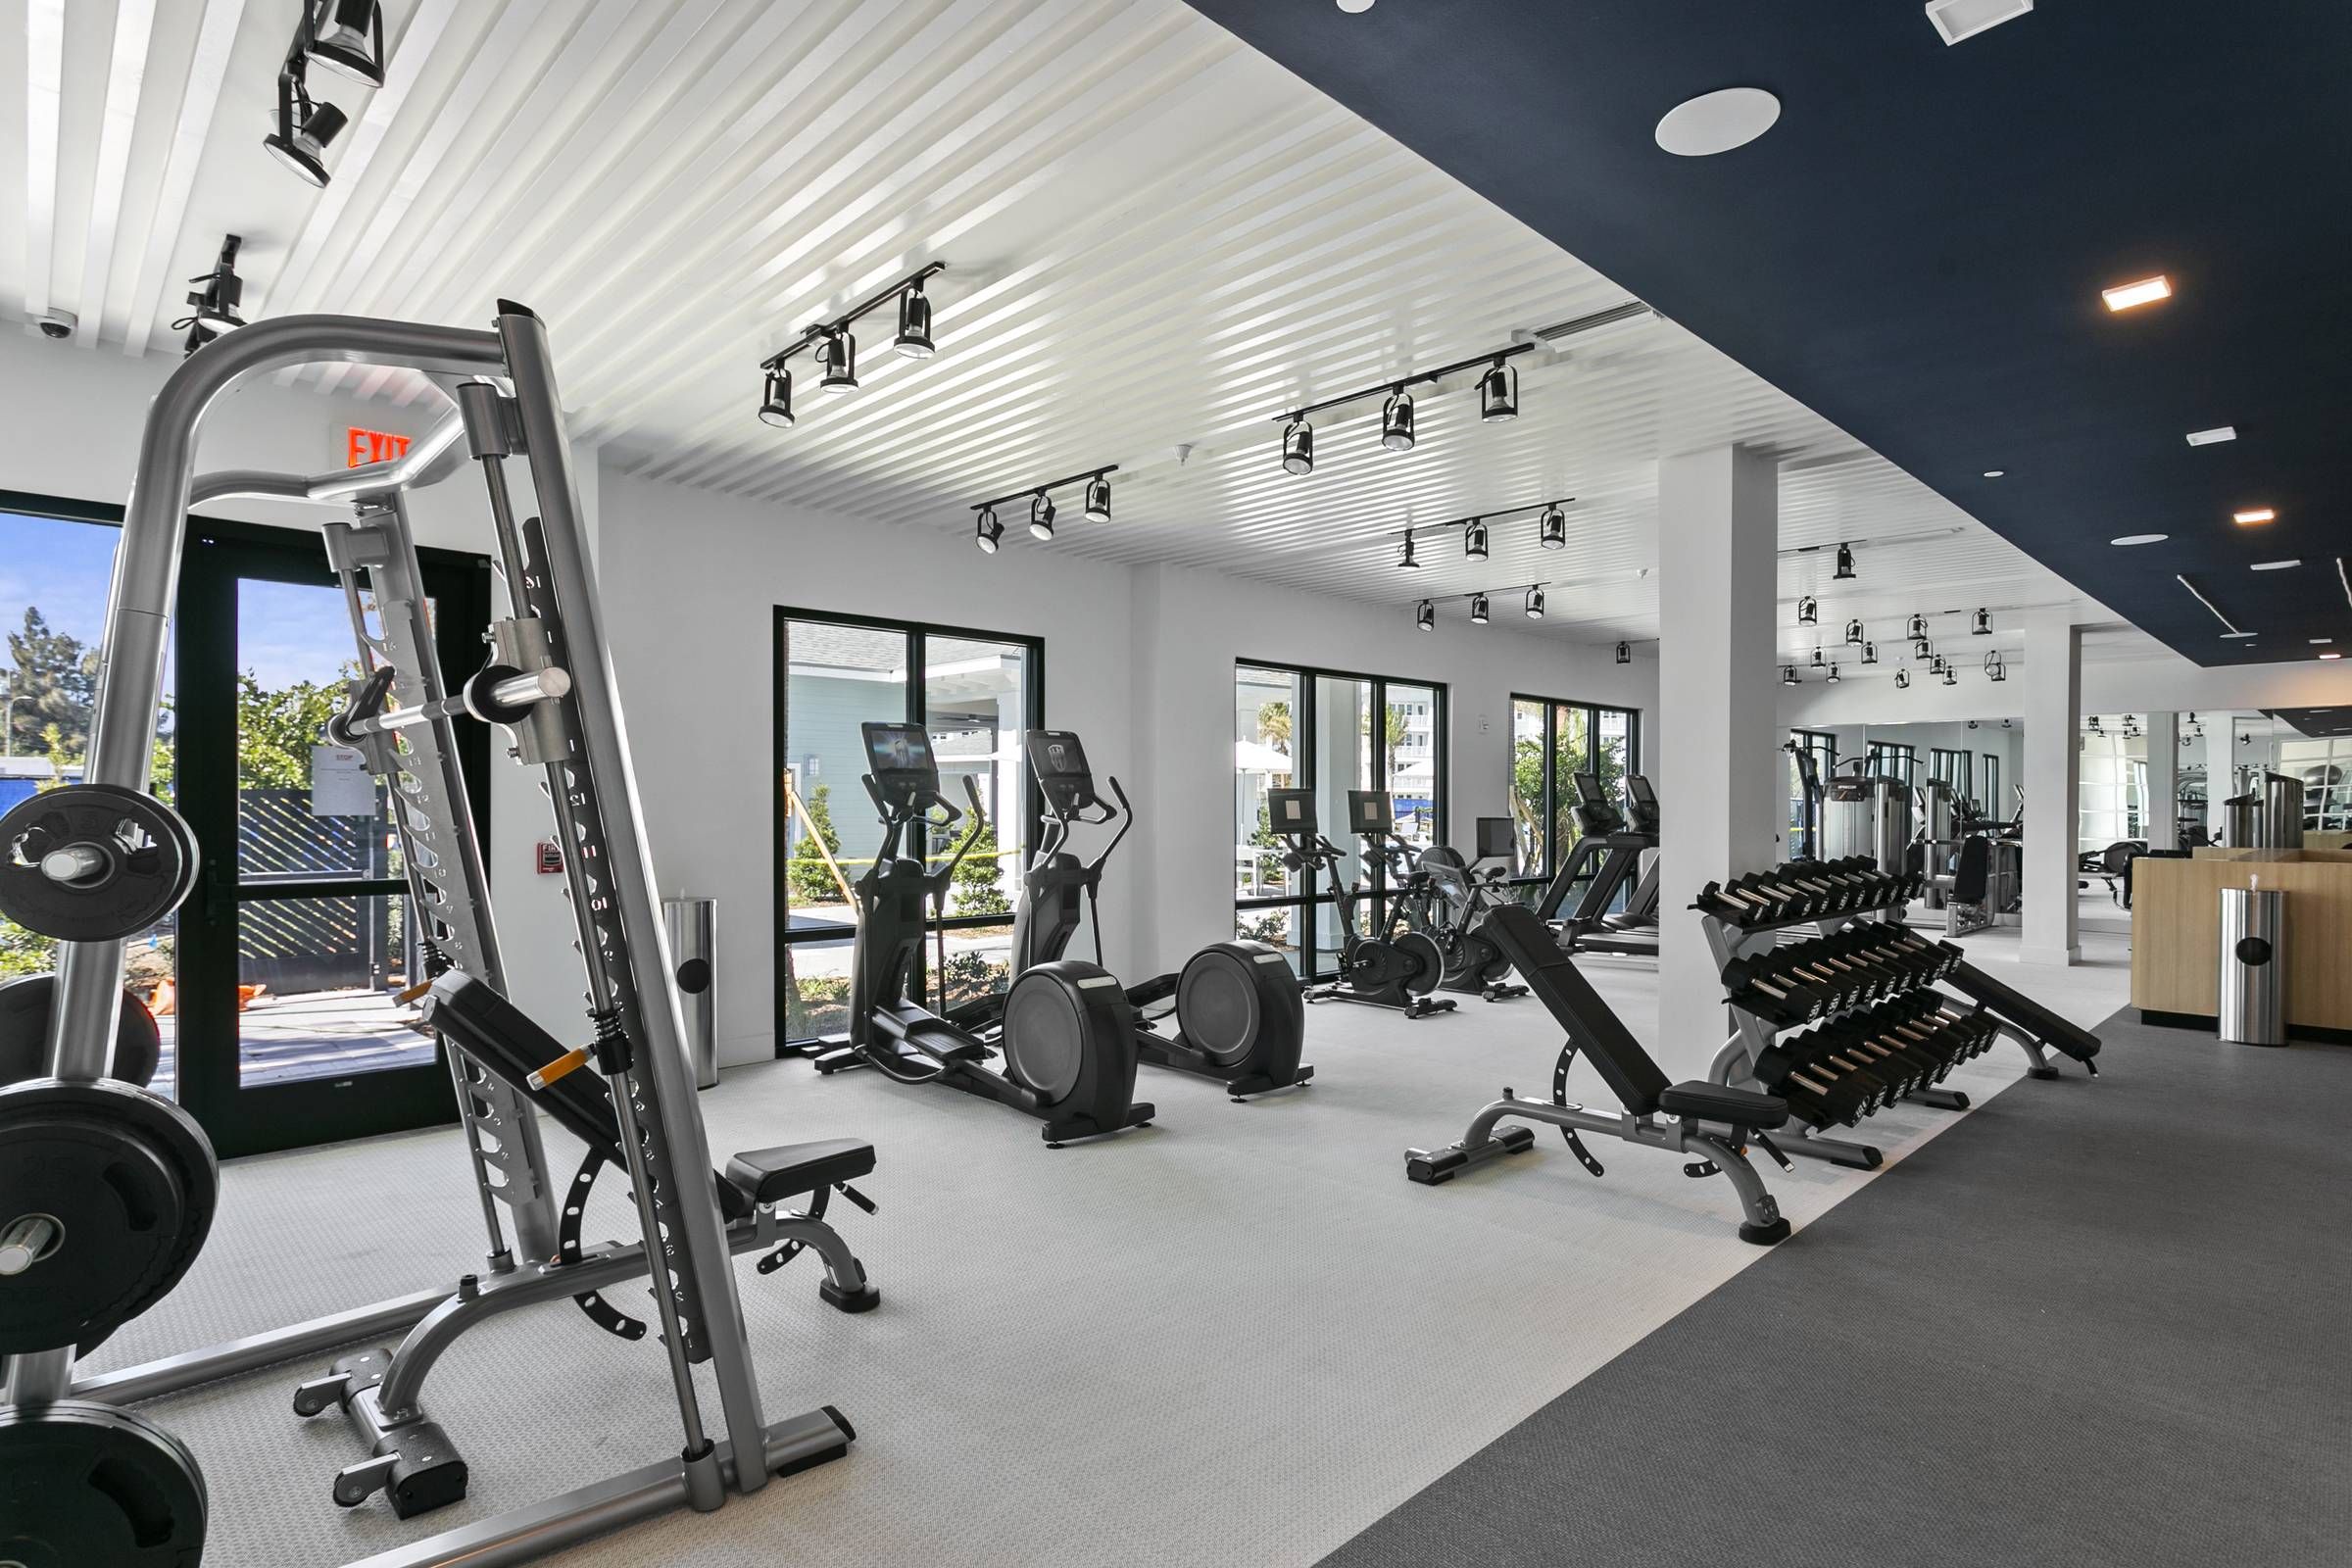 Alta Belleair's well-equipped fitness center, featuring state-of-the-art exercise machines and ample natural light filtering through floor-to-ceiling windows.